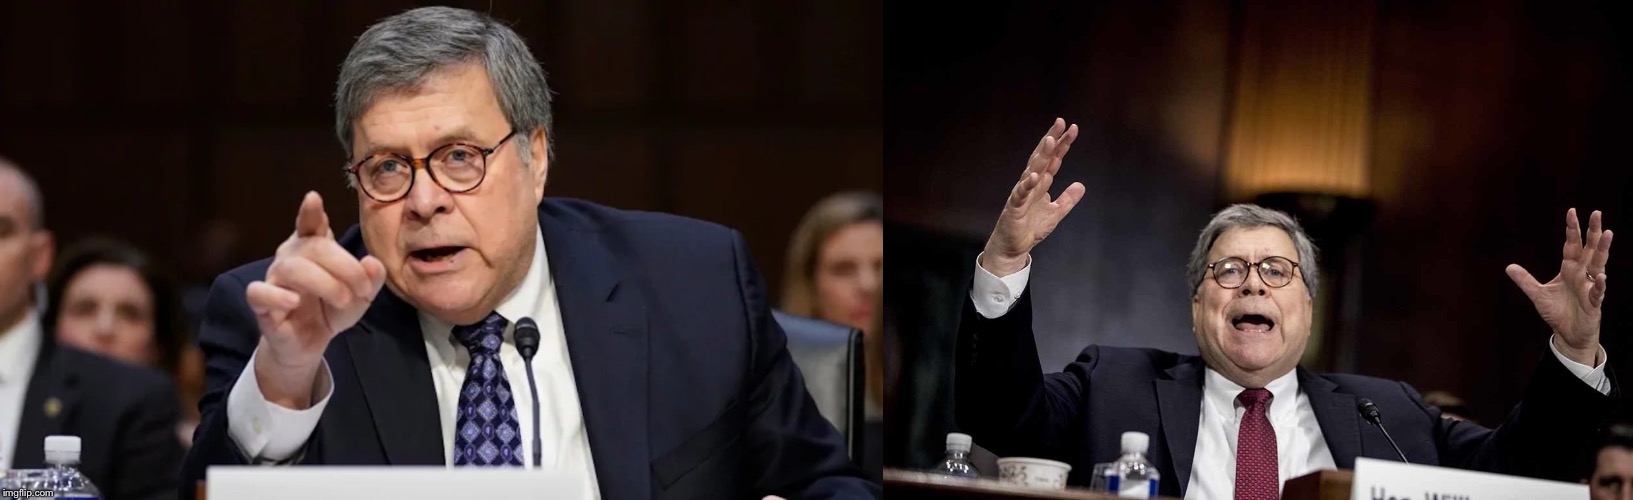 High Quality Barr Angry at Barr Blank Meme Template